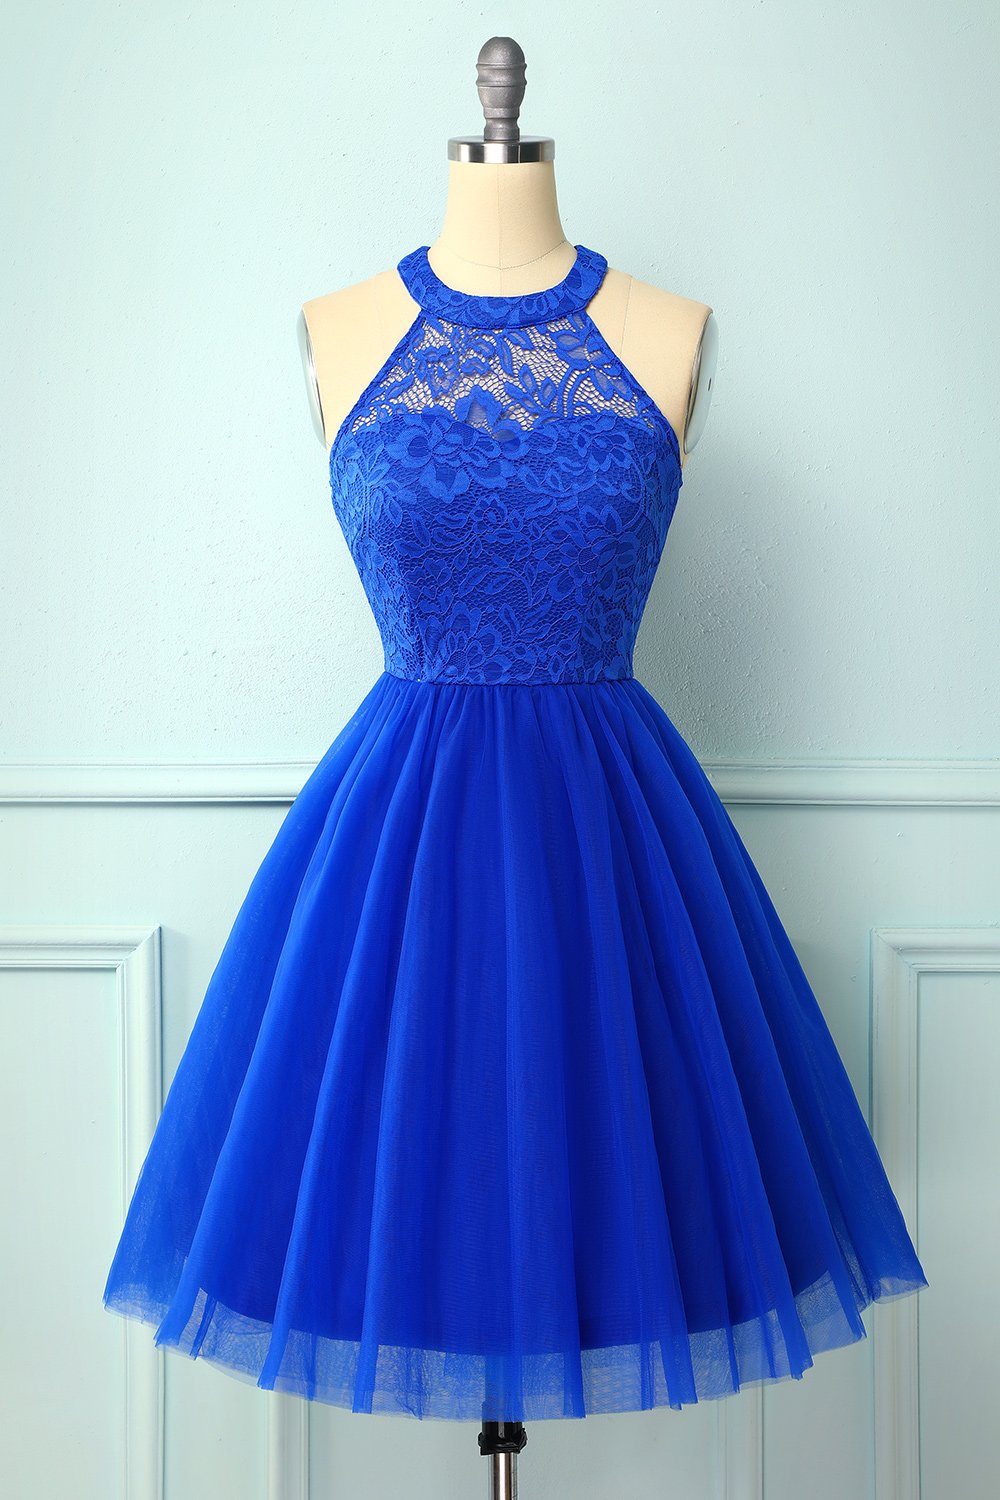 Halter Royal Blue Lace Dress outfit, Homecomming Dress Black